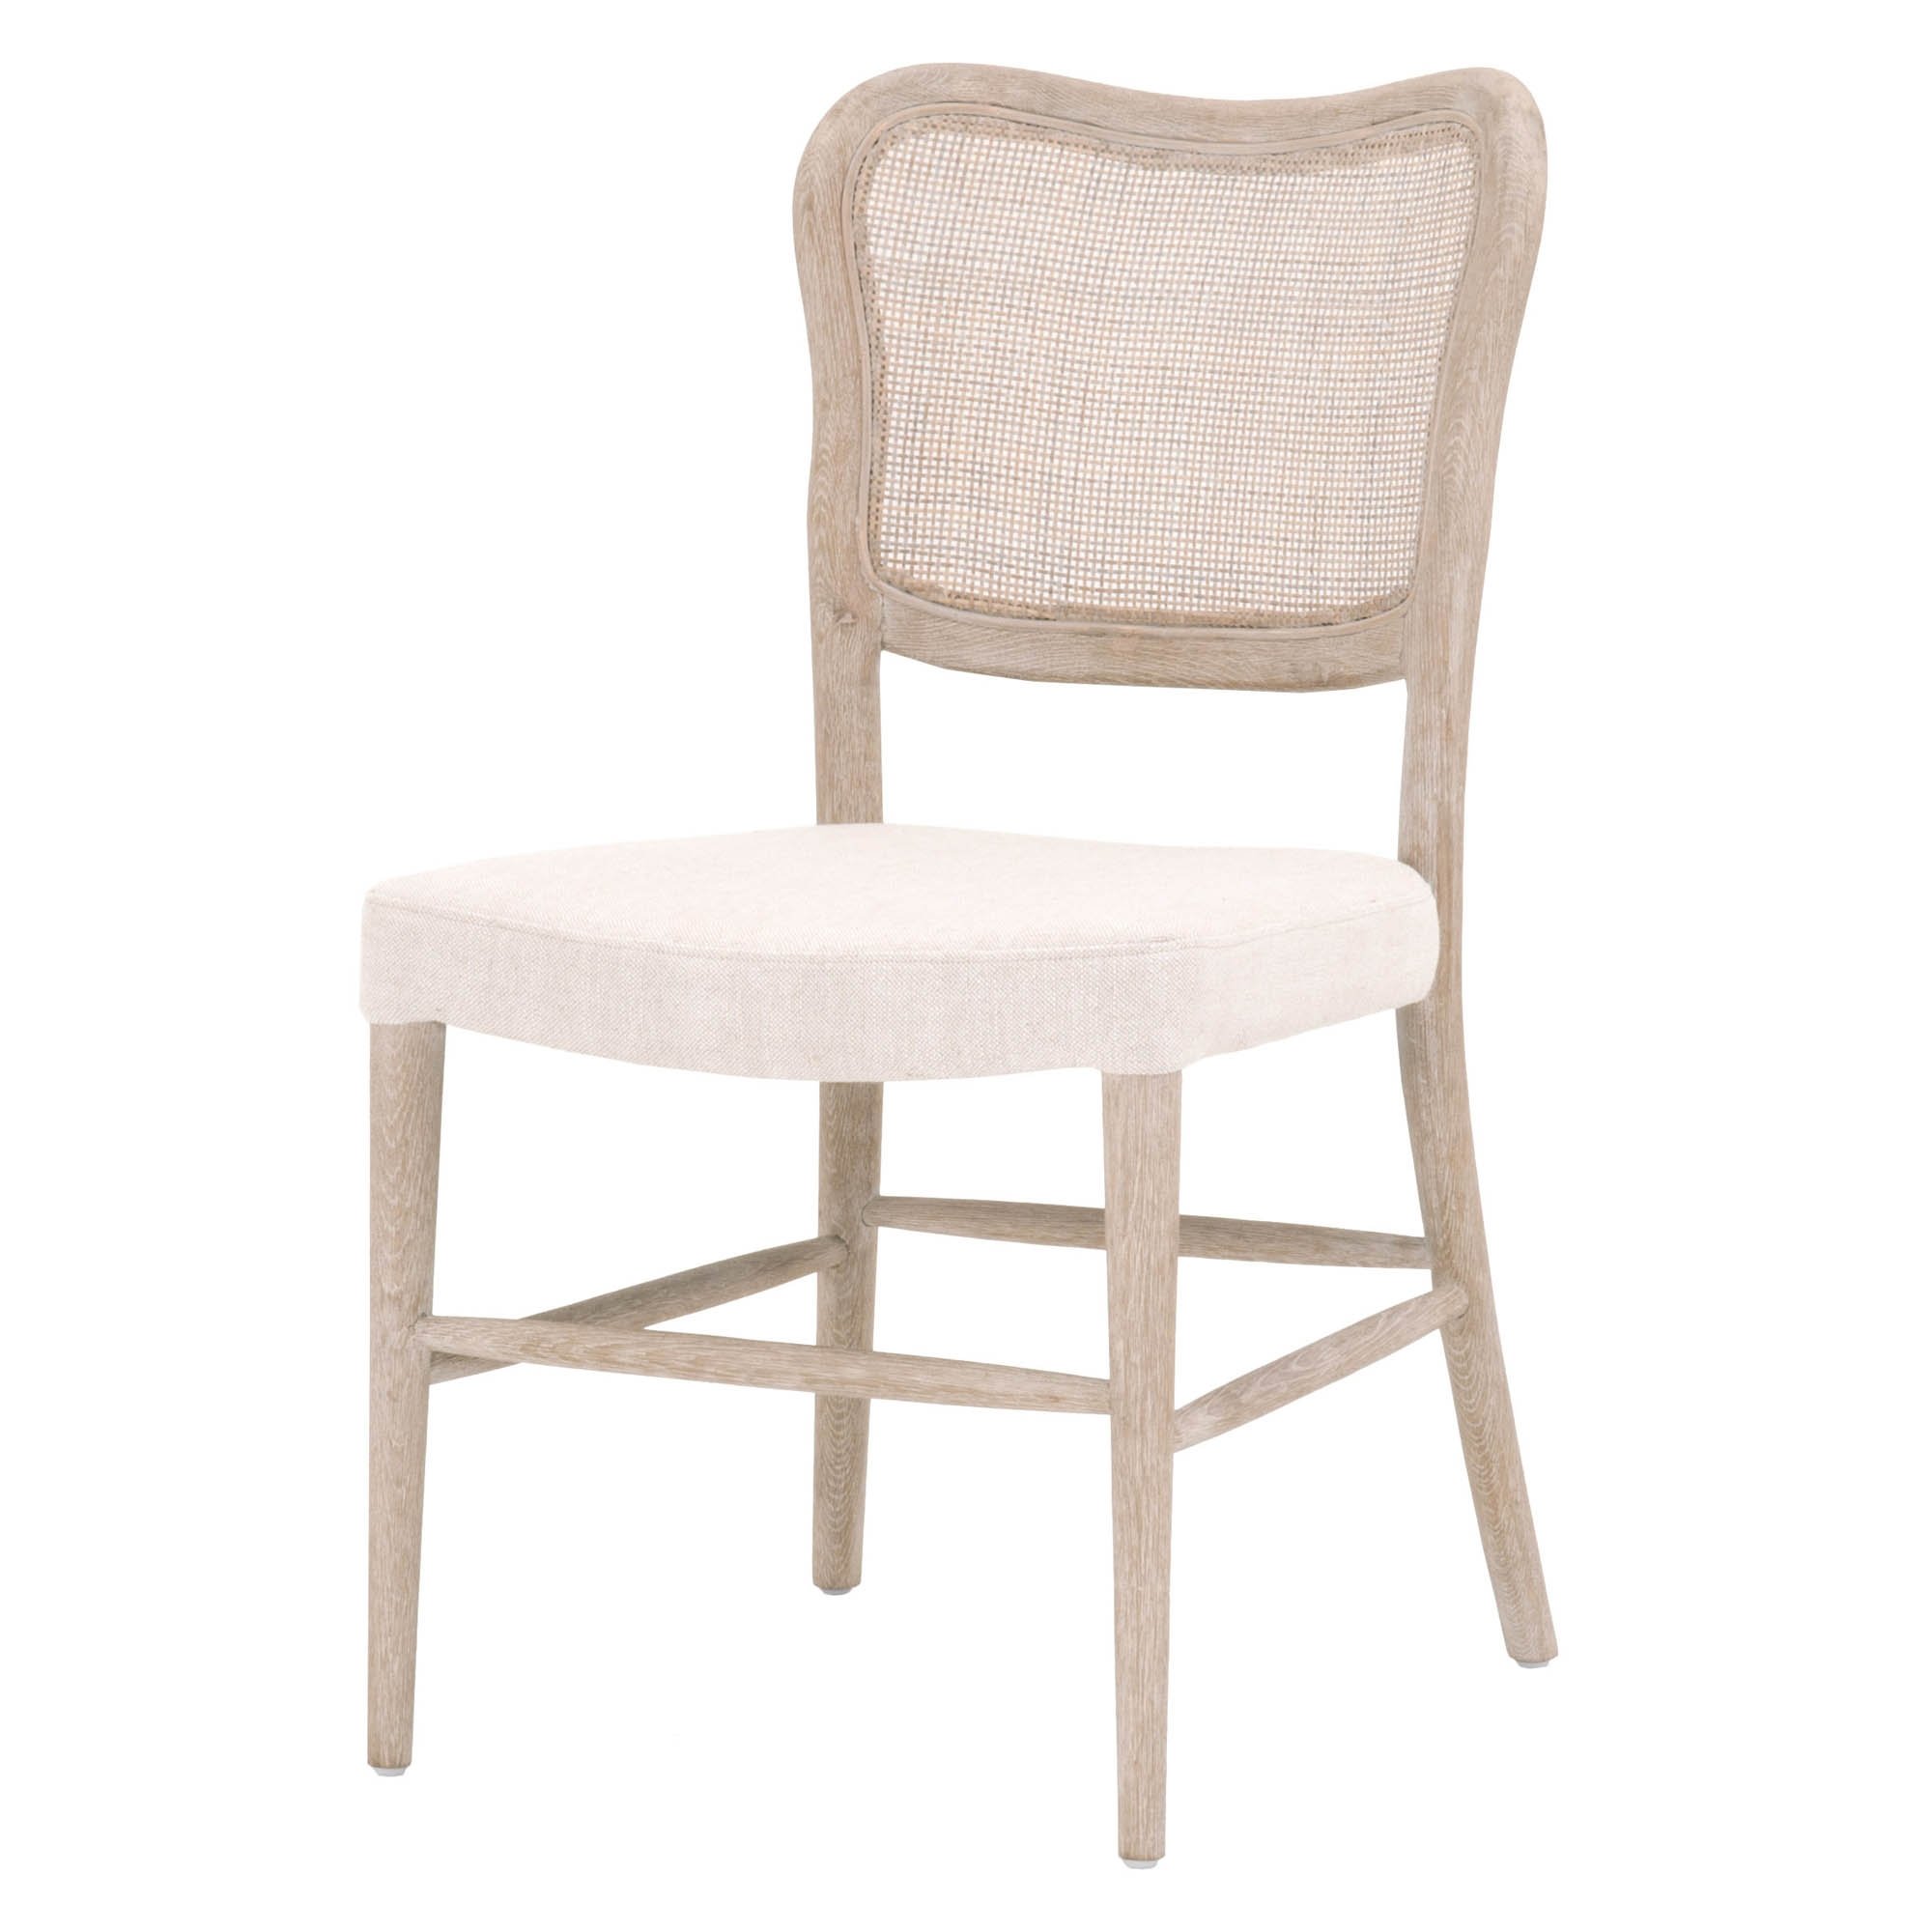 Coraline Dining Chair, Bisque, Set of 2 - Image 1